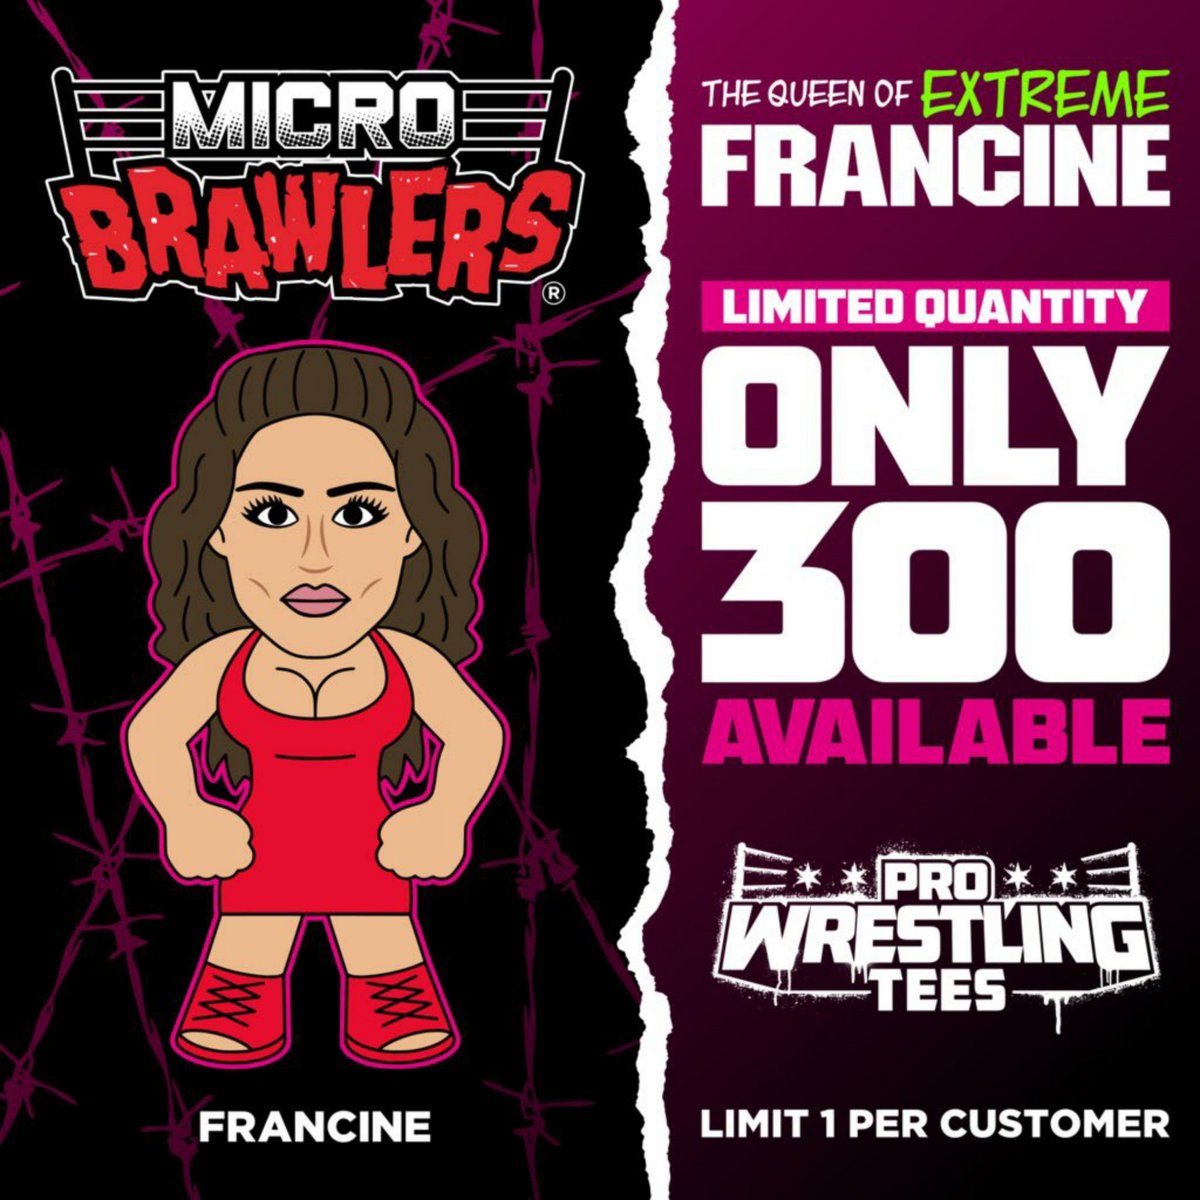 1 of 300 @PWTees Micro Brawlers @ECWDivaFrancine goes on sale this Monday at ProWrestlingTees.com/Francine!
#ScratchThatFigureItch